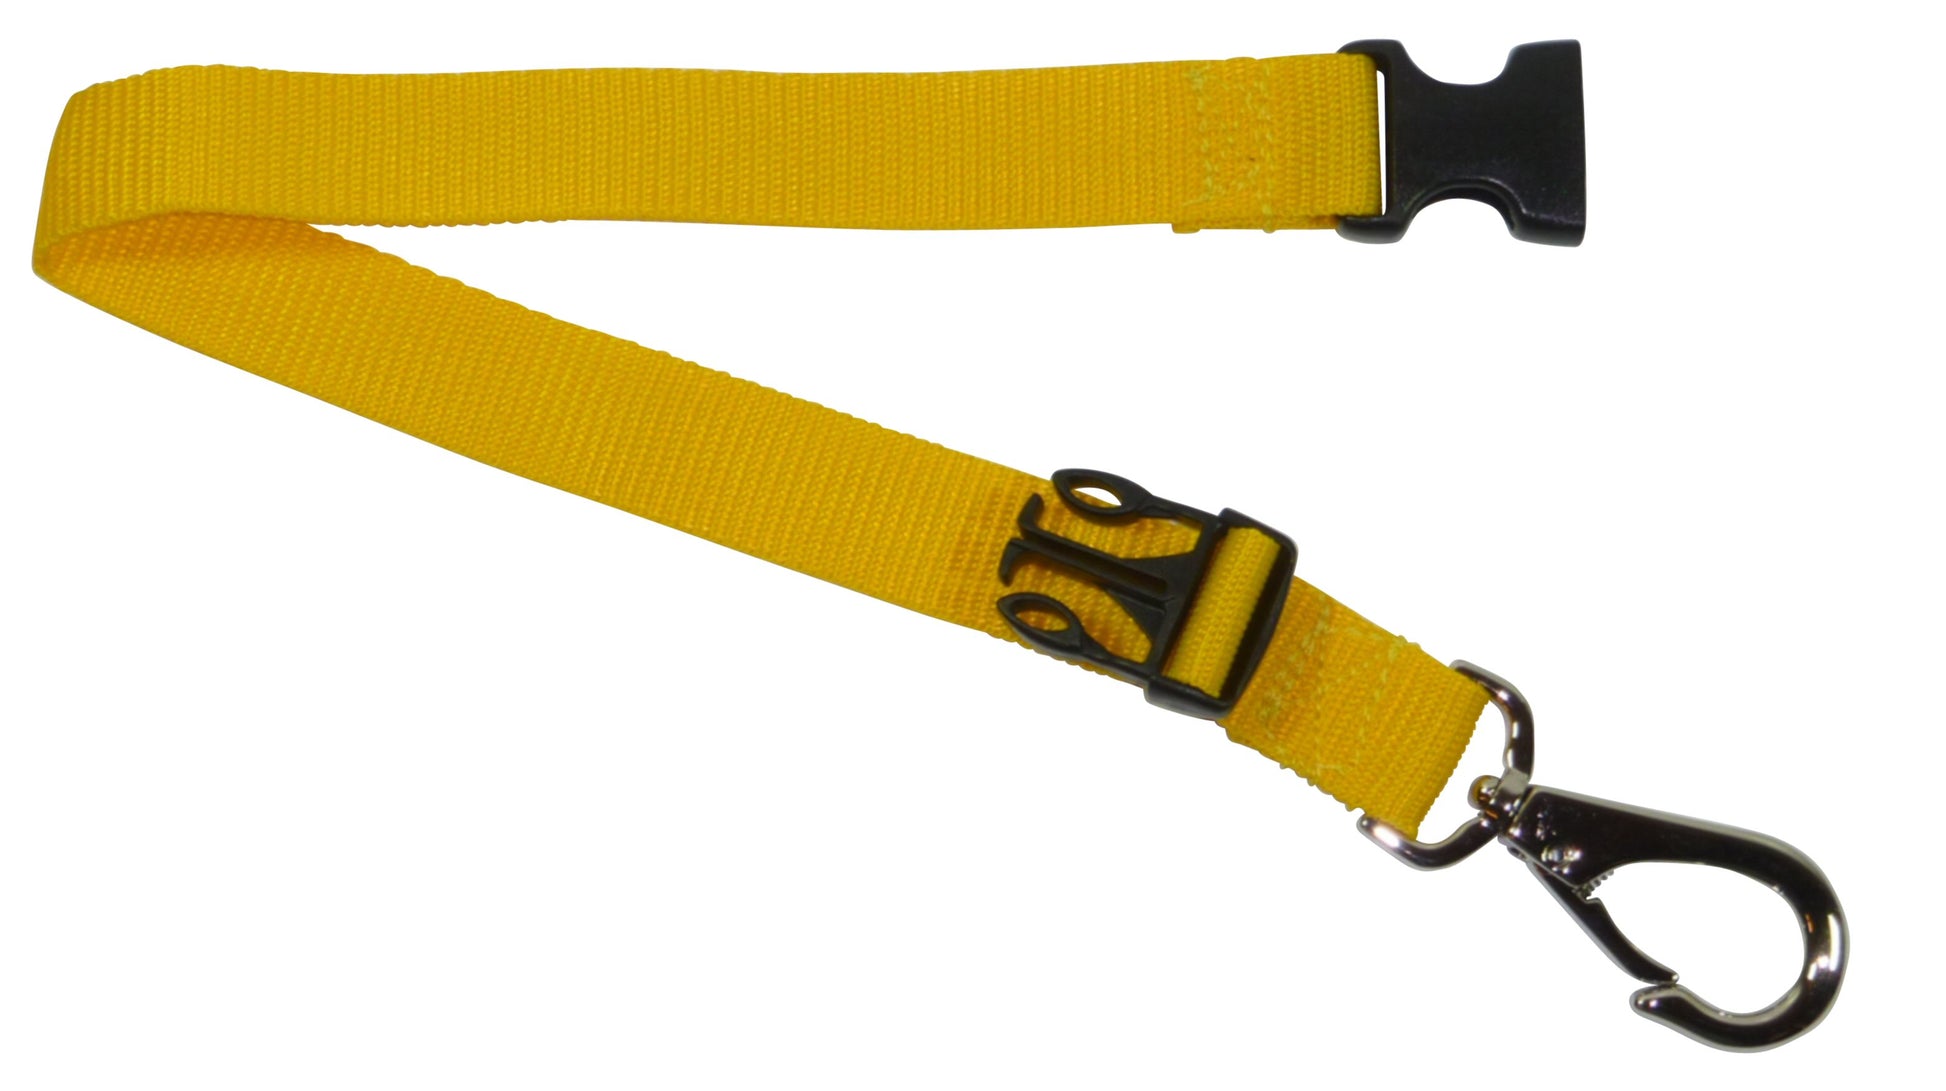 Benristraps Bag Support Strap, Pack of 2 Straps in yellow